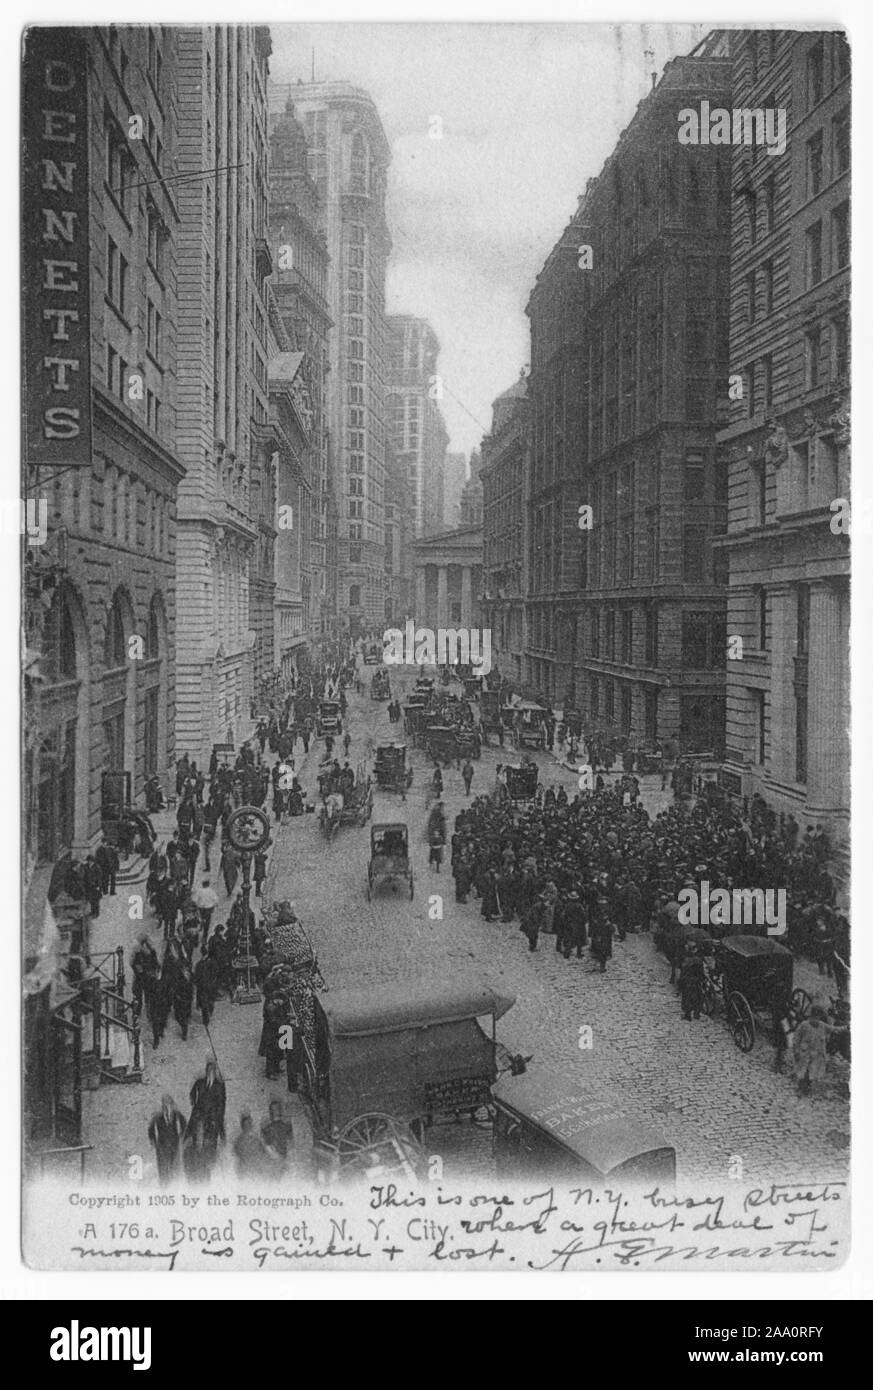 Engraved postcard of crowds of people and vehicles on Broad Street, New York City, published by Rotograph Co, 1905. From the New York Public Library. () Stock Photo